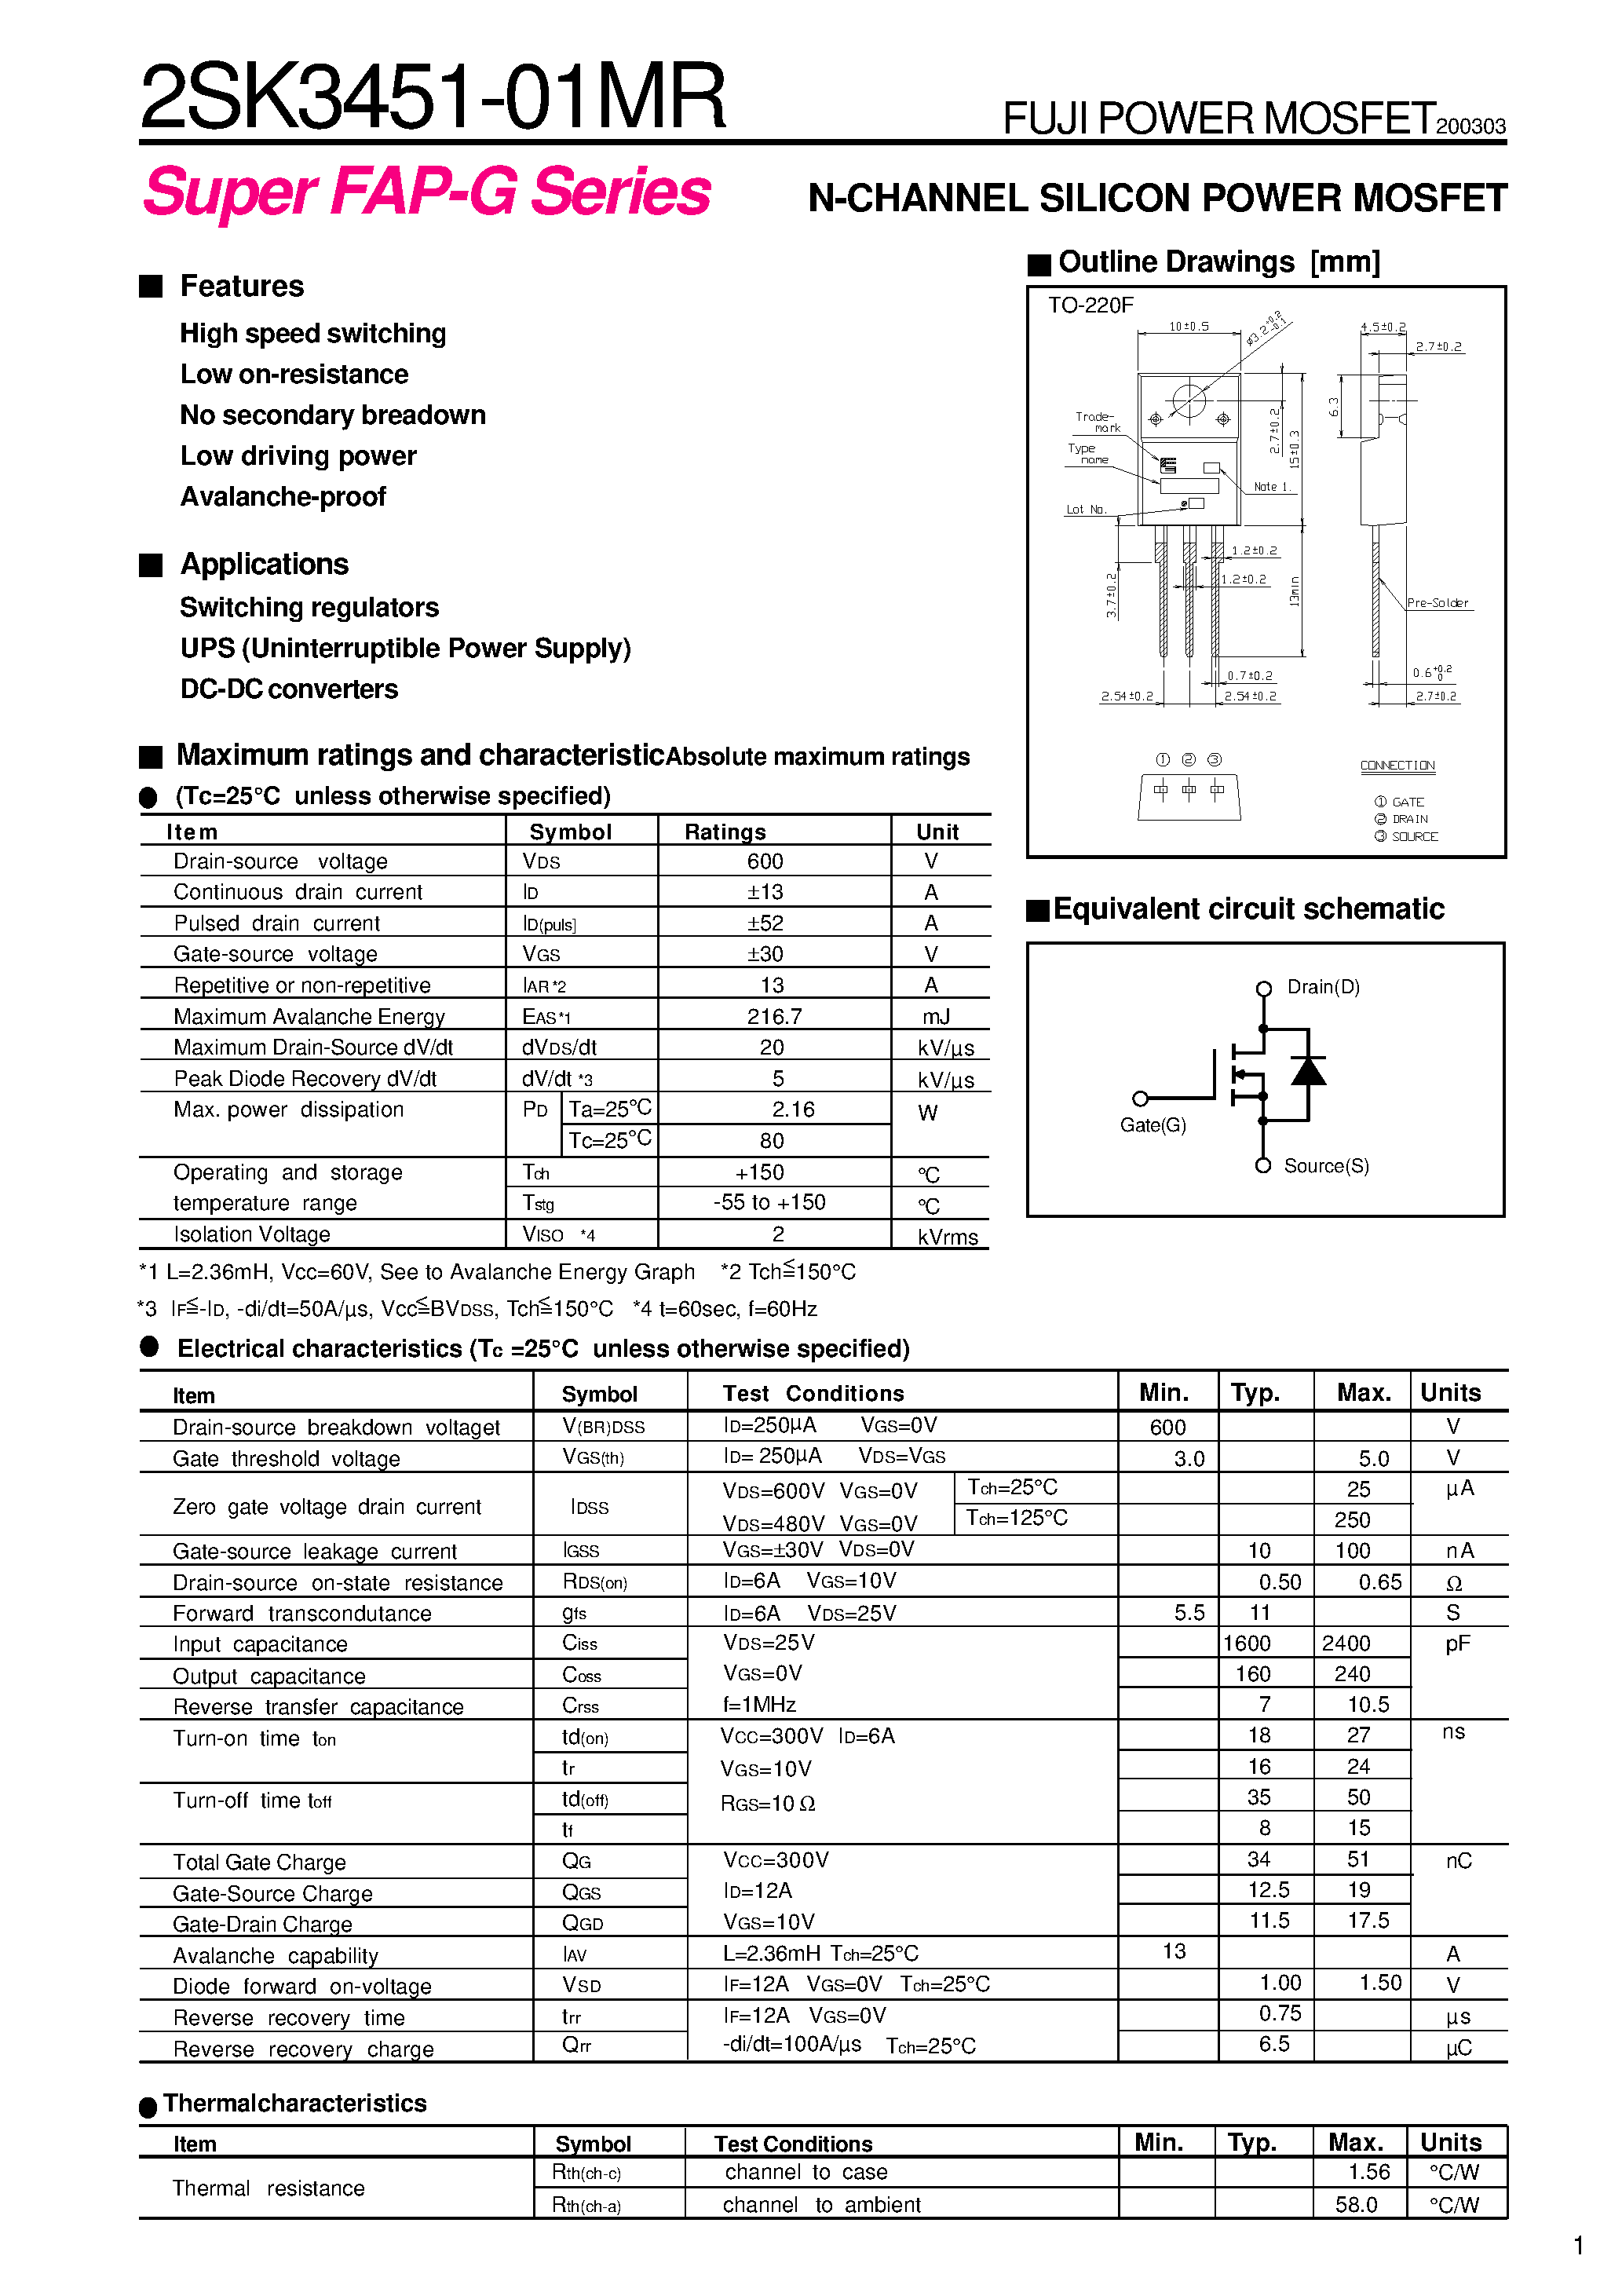 Datasheet 2SK3451-01 - High speed switching Low on-resistance No secondary breadown Low driving power Avalanche-proof page 1